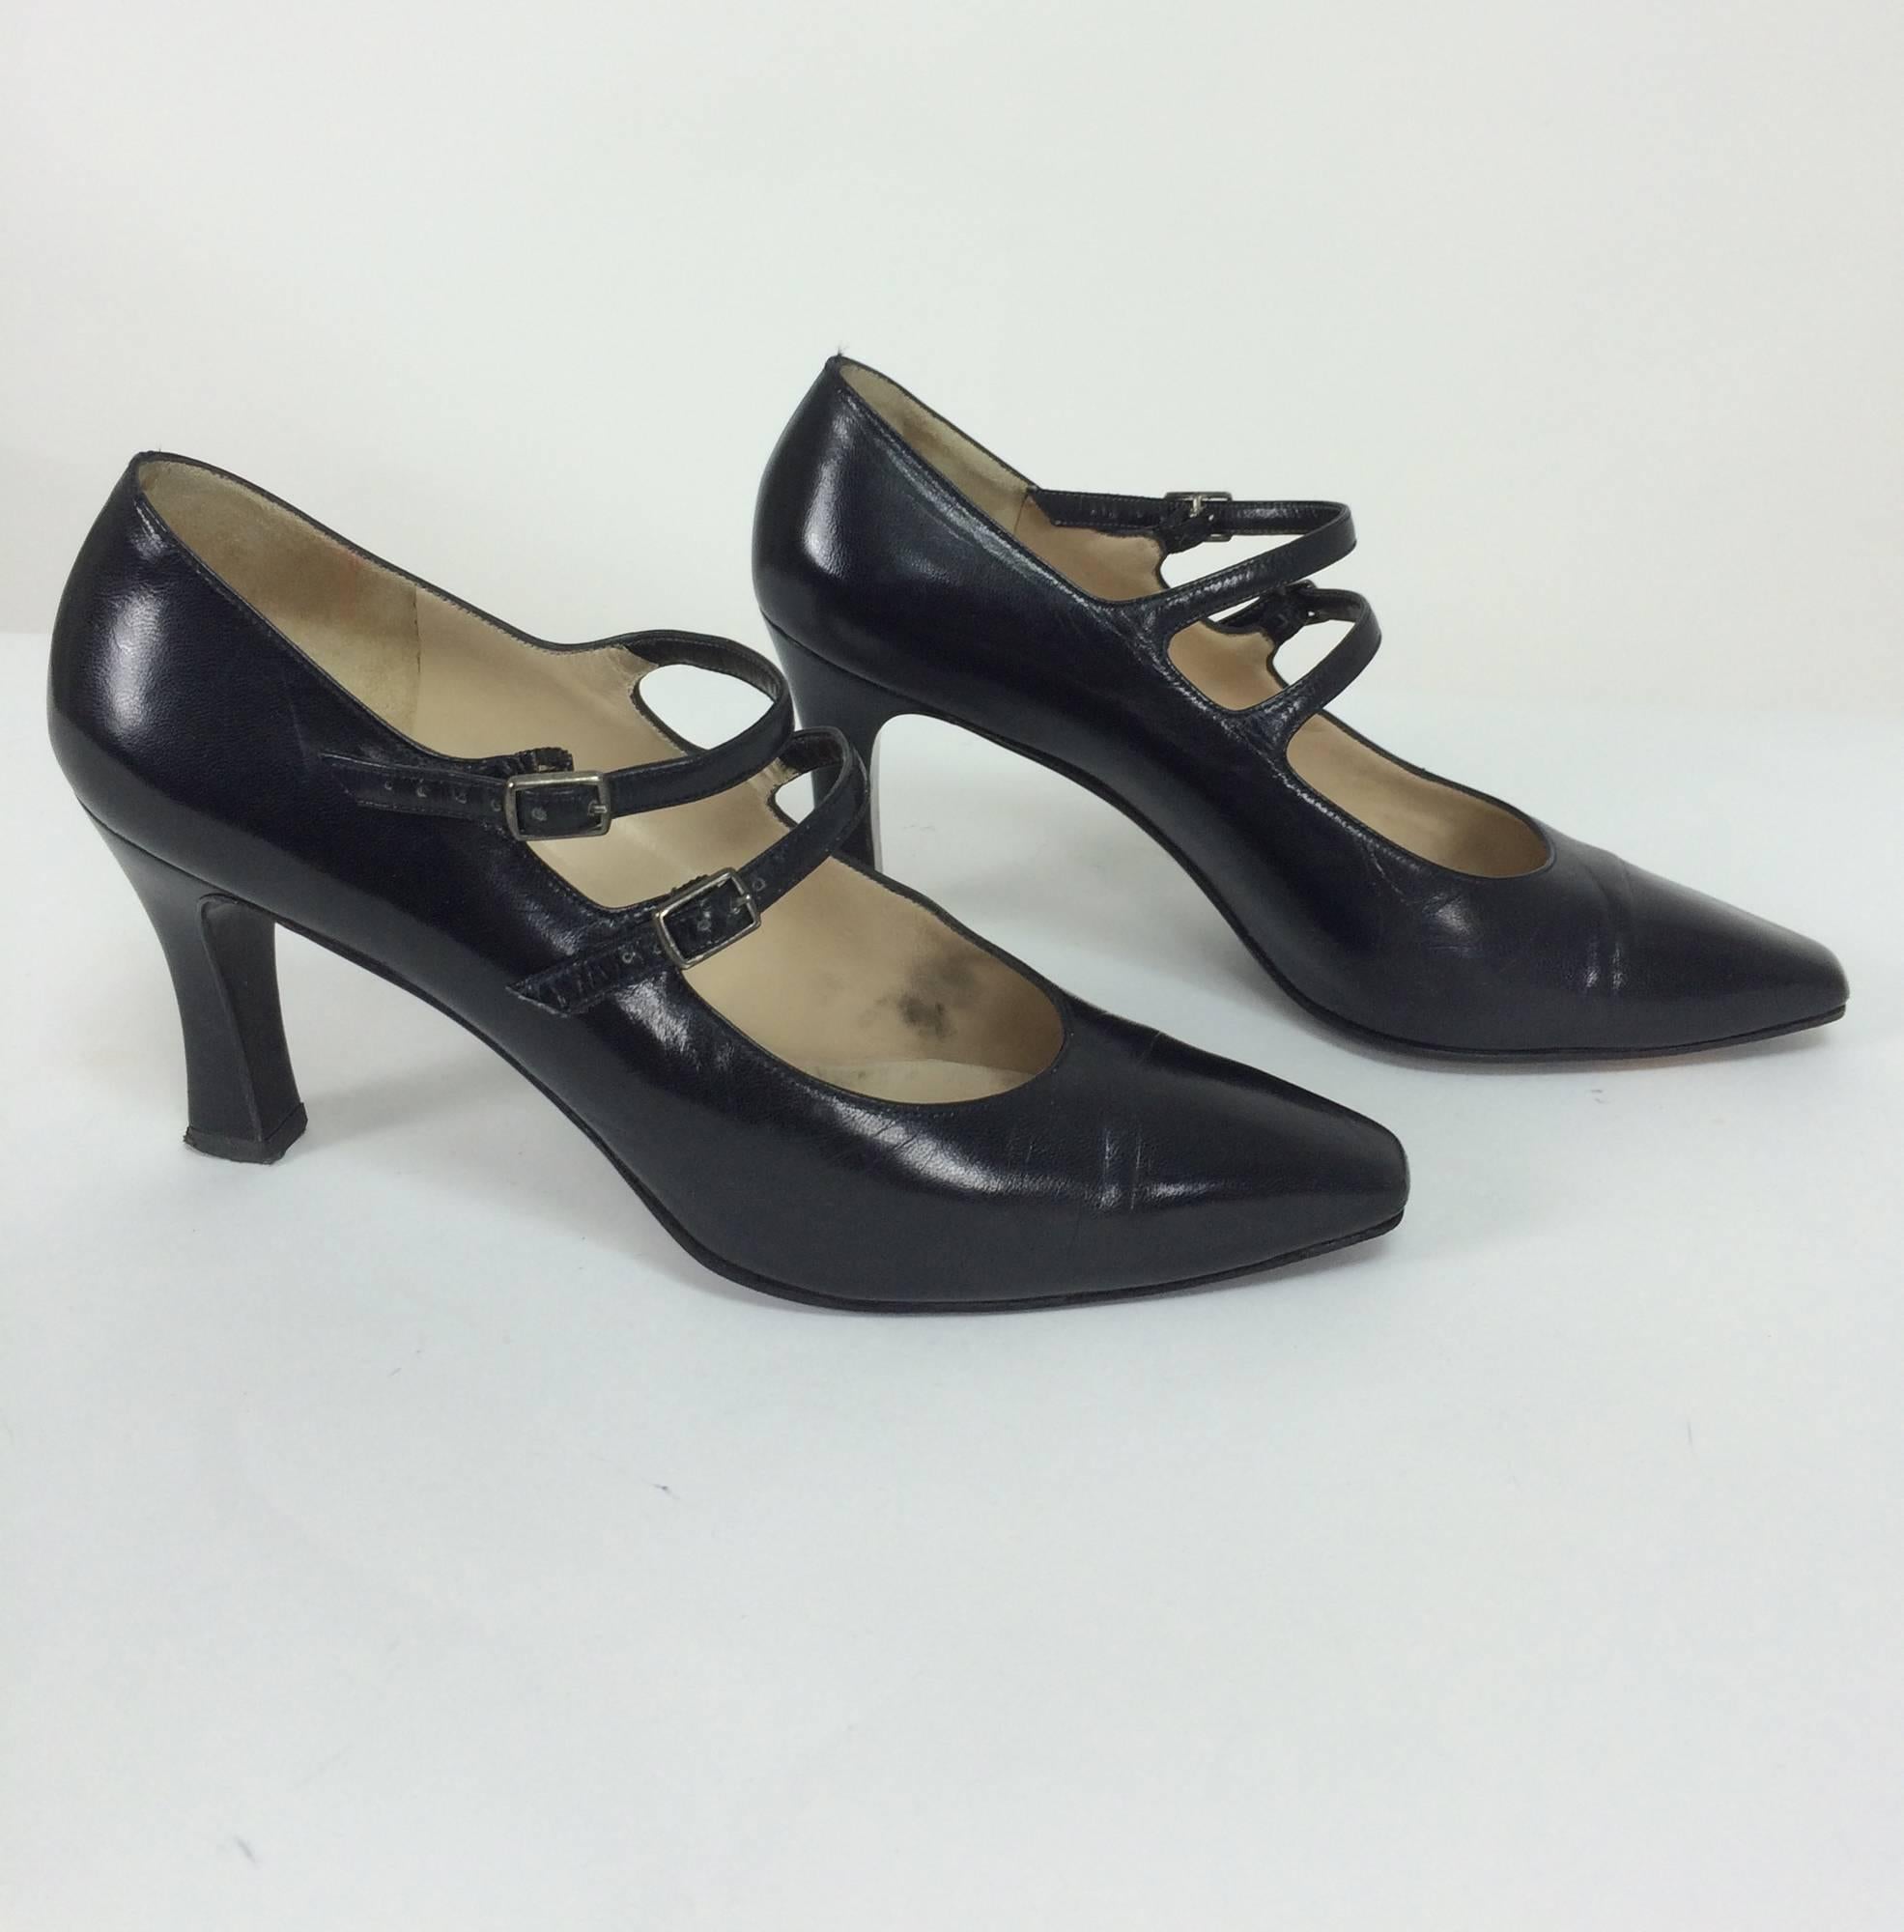 Rene Mancini glazed black calf double strap front high heel 37M...Glazed black calf double buckle strap at the instep high heeled pumps, approx. 3 1/2